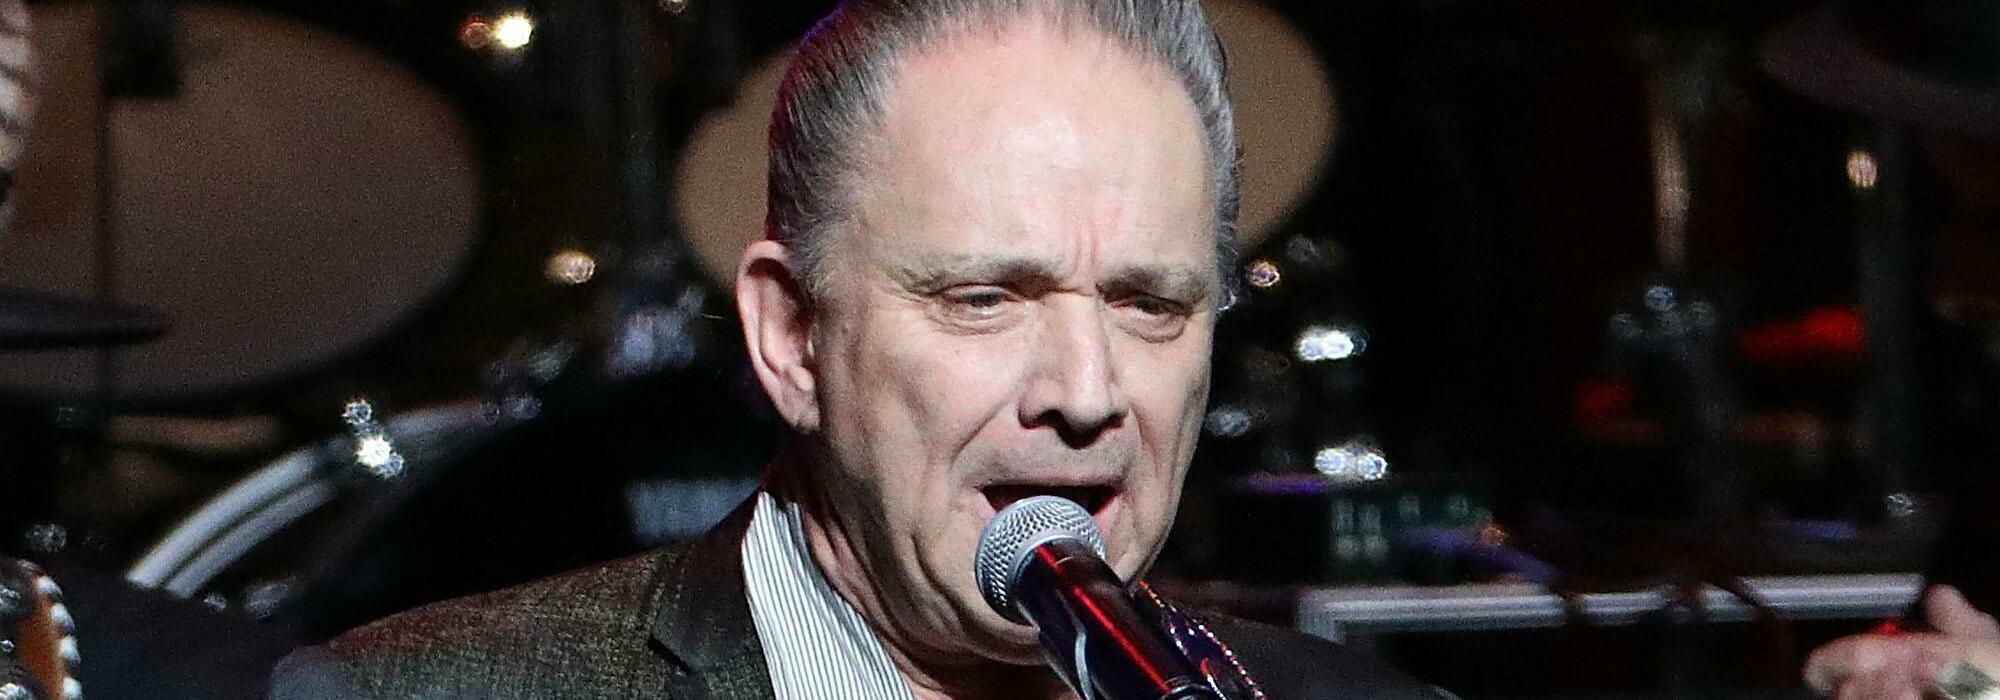 A Jimmie Vaughan live event